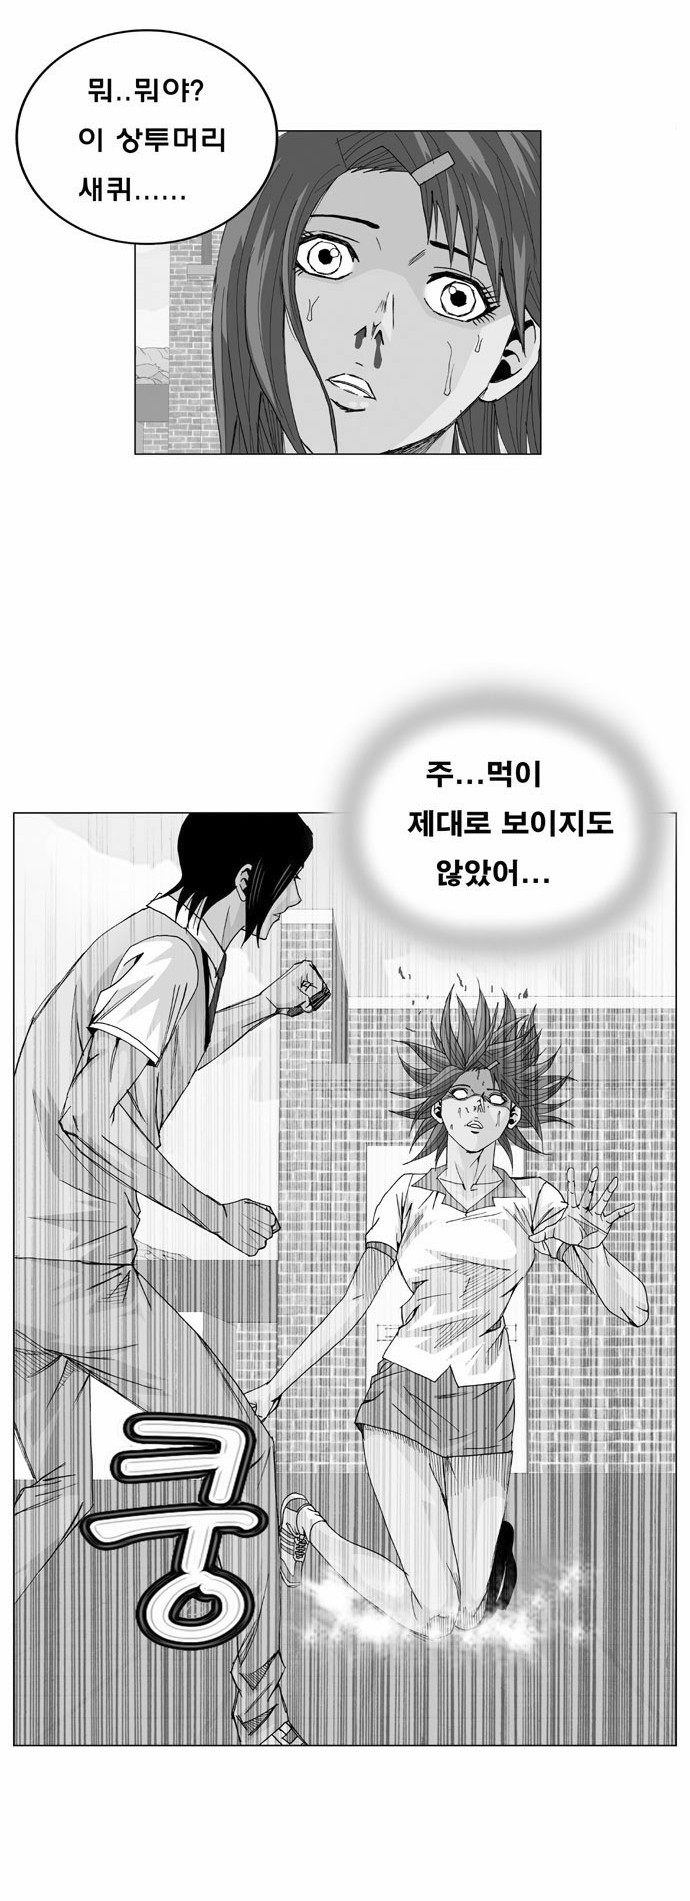 Ultimate Legend - Kang Hae Hyo - Chapter 9 - Page 2